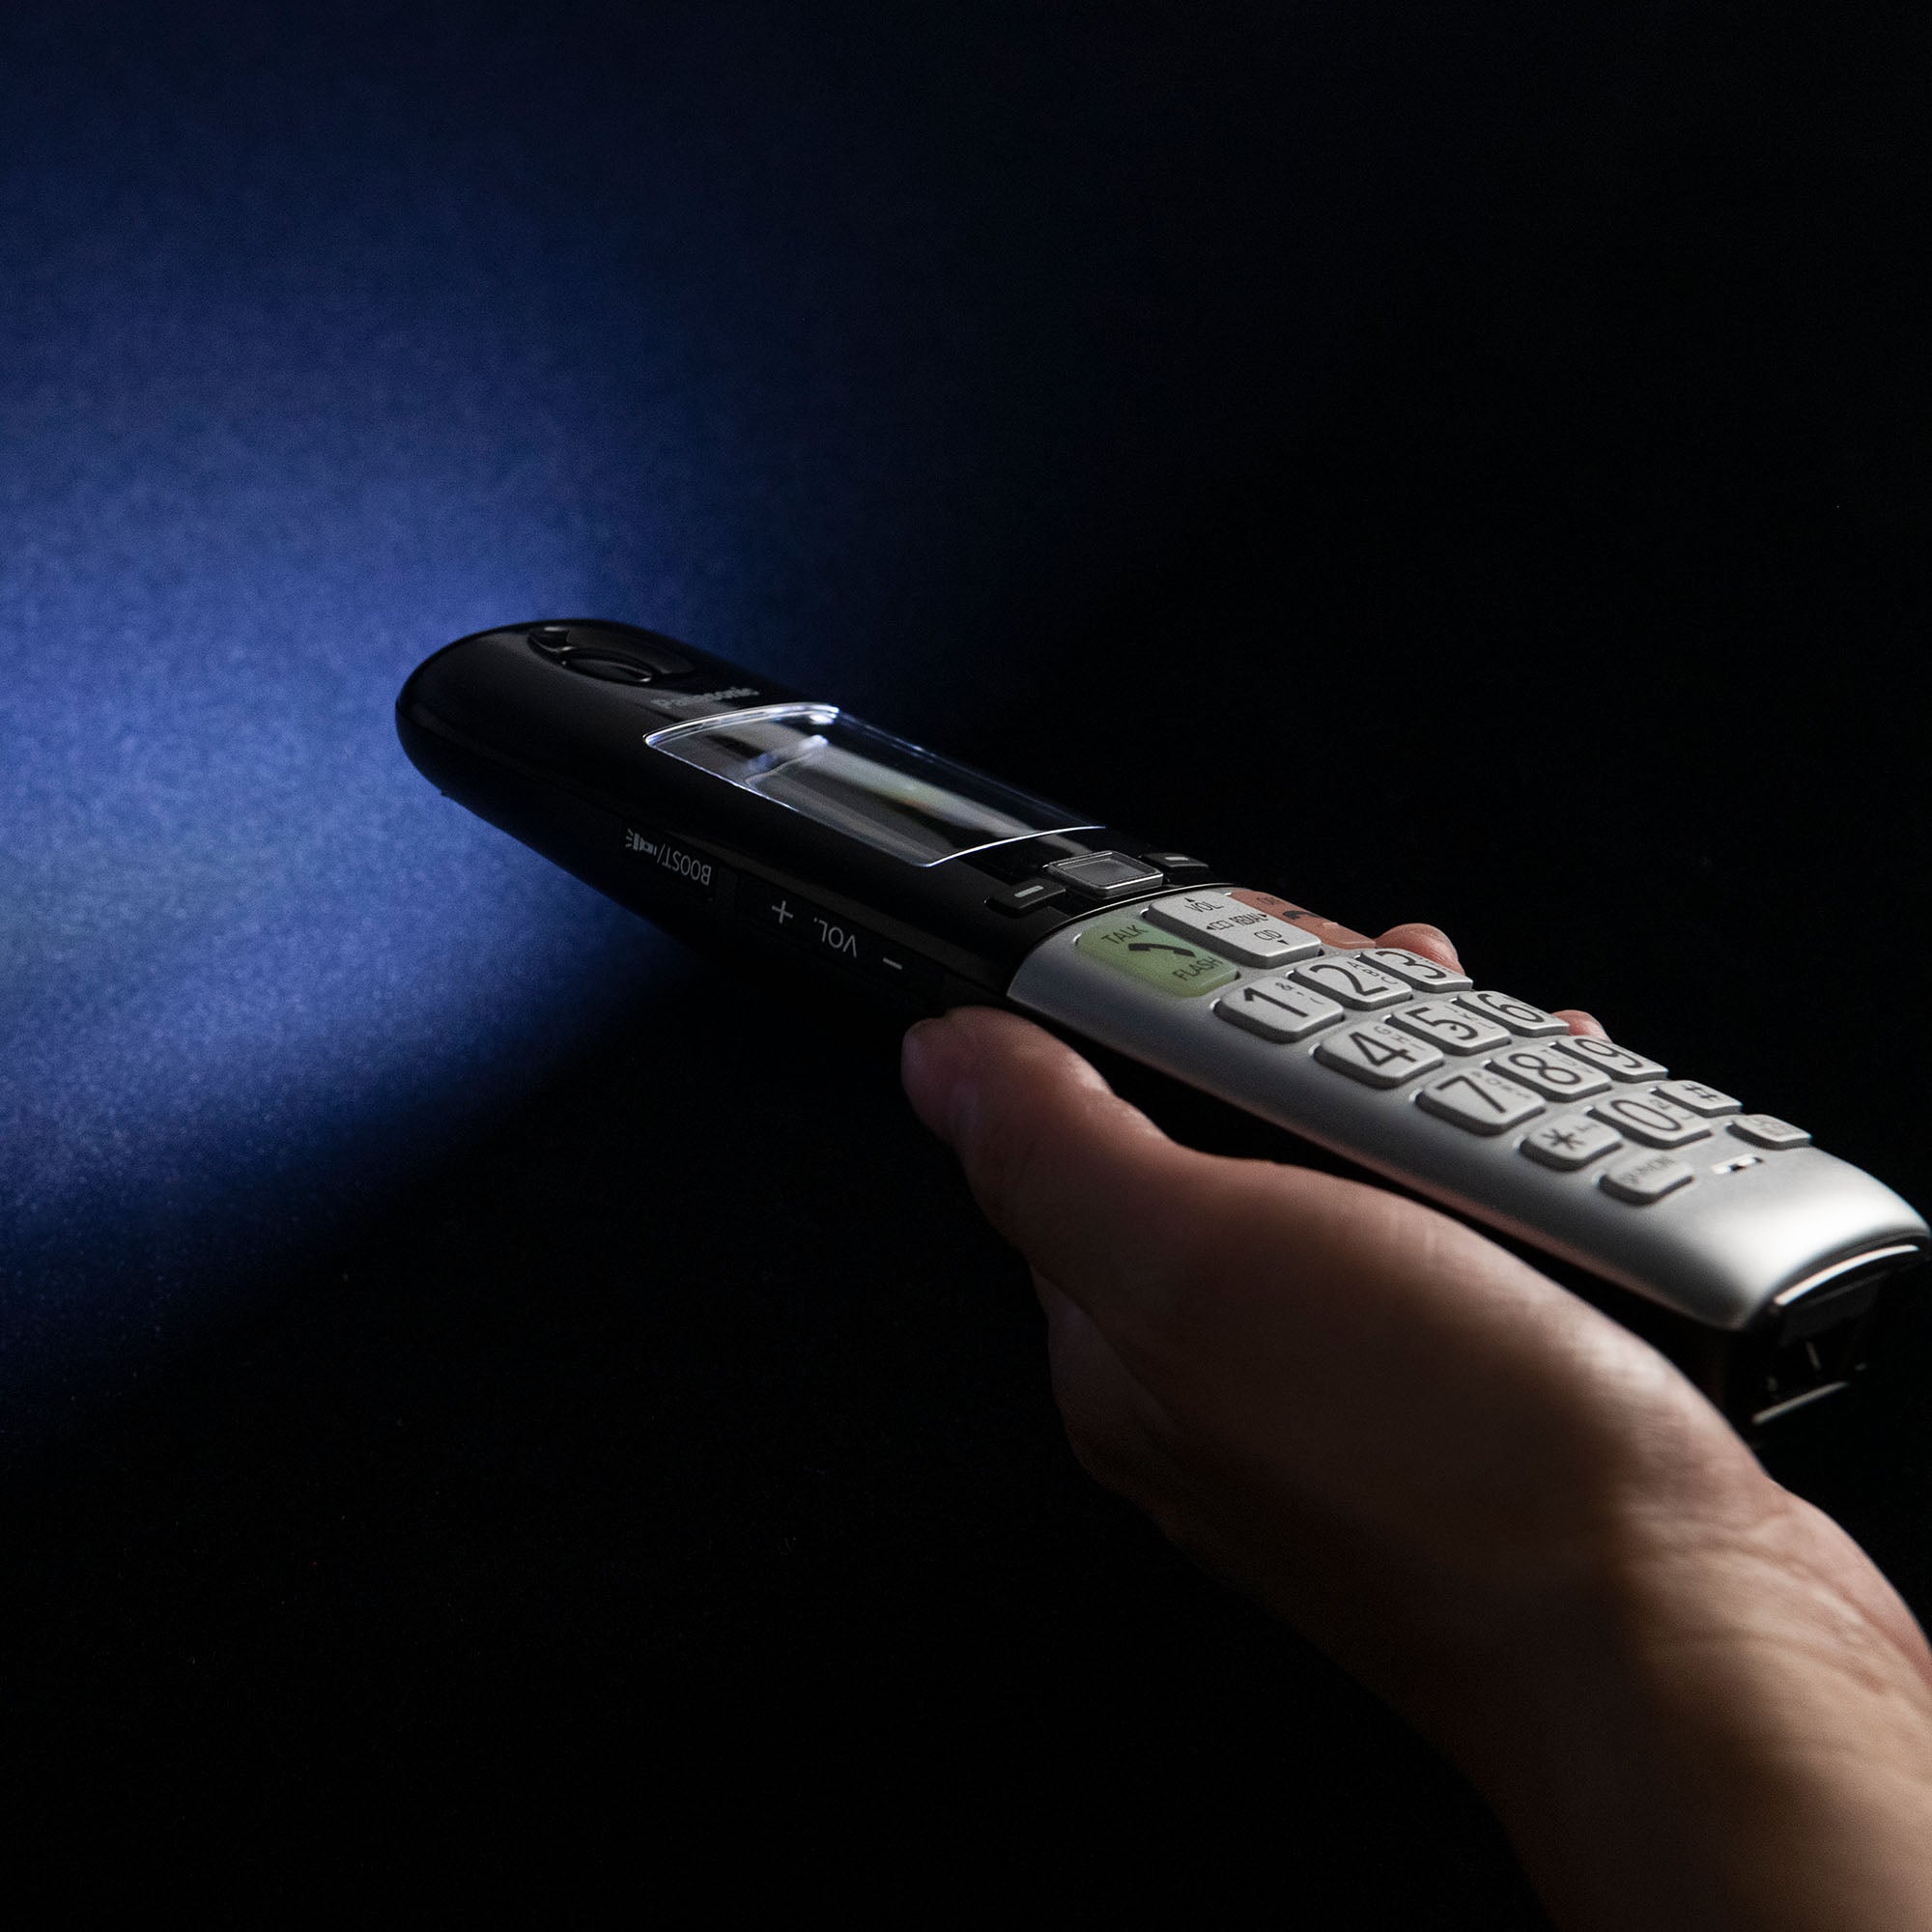 Easy-to-Use Cordless Phone with Flashlight and Quick-Touch Dialing - KX-TGU4 Series